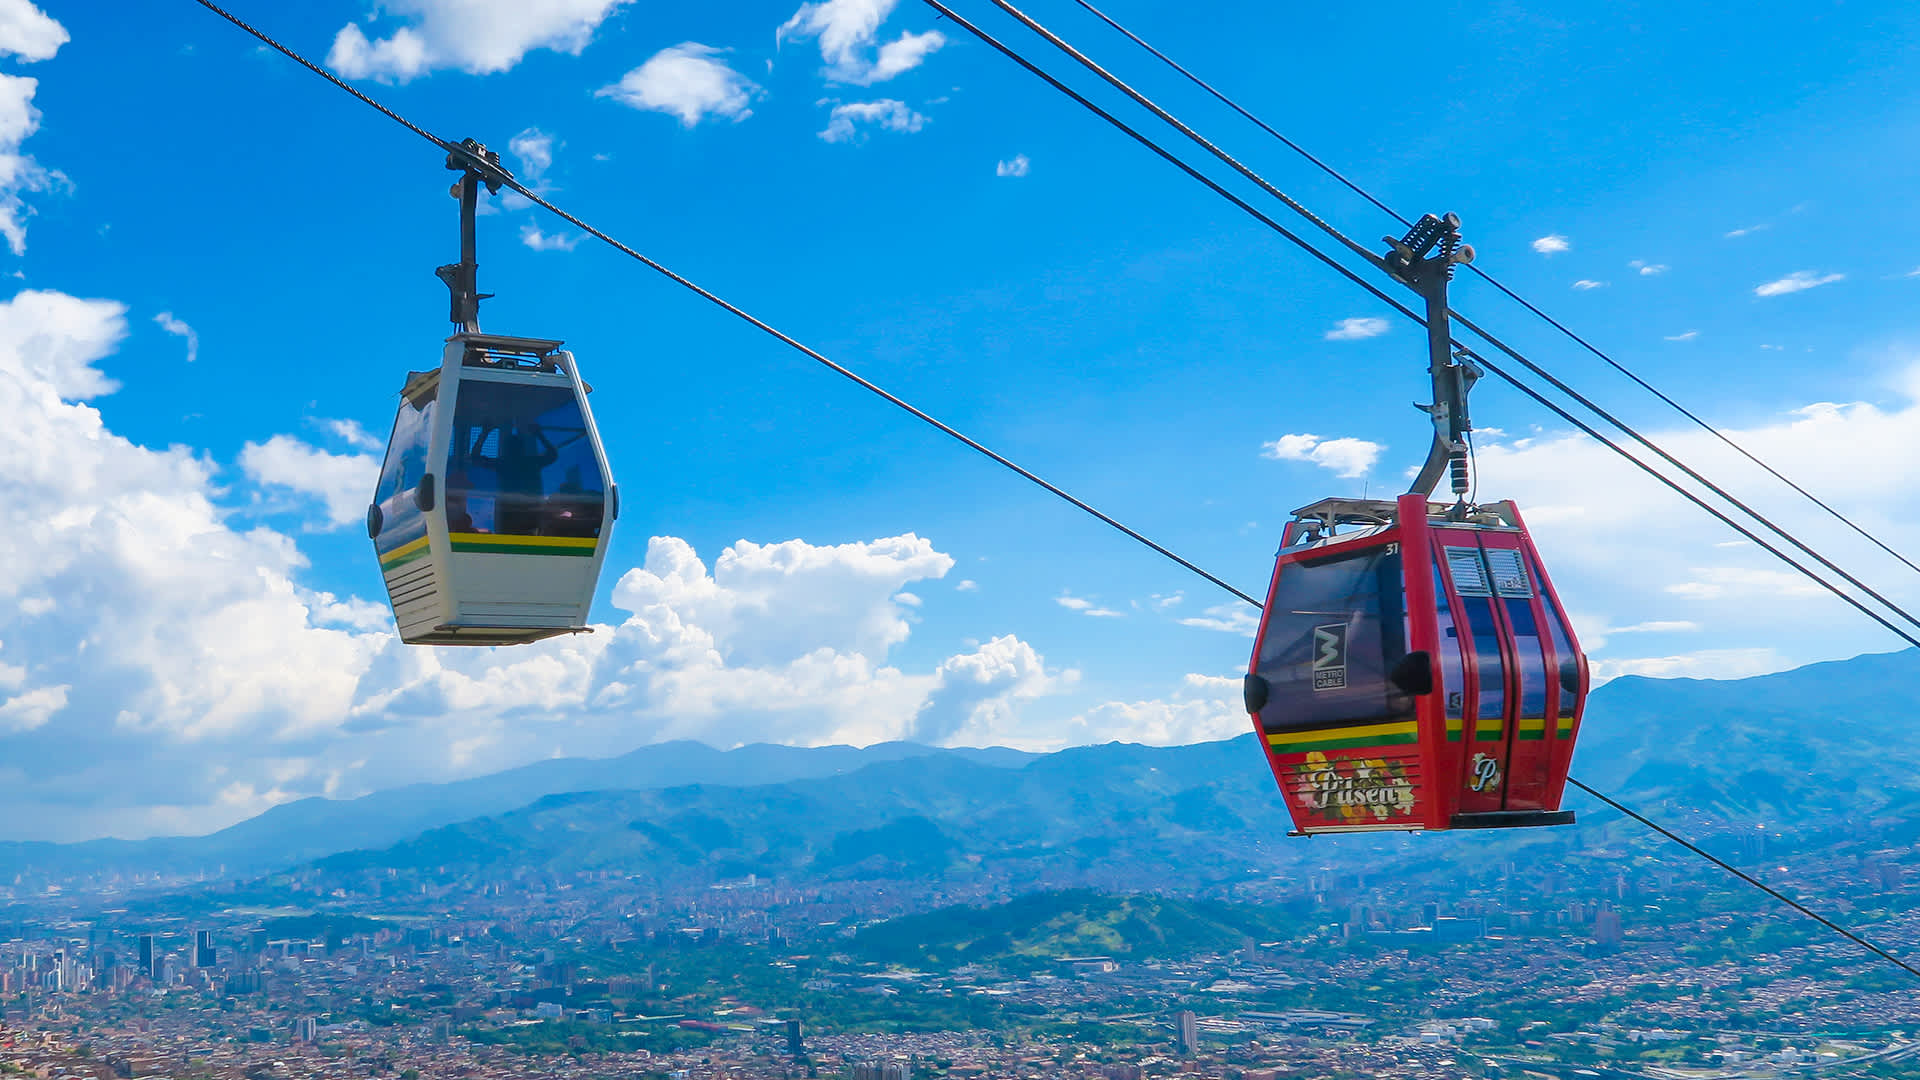 Cable cars of the Metrocable, a gondola system that links the city with the neighborhoods and suburbs in the mountains in Medellín, Colombia. (Photo by EyesWideOpen/Getty Images)